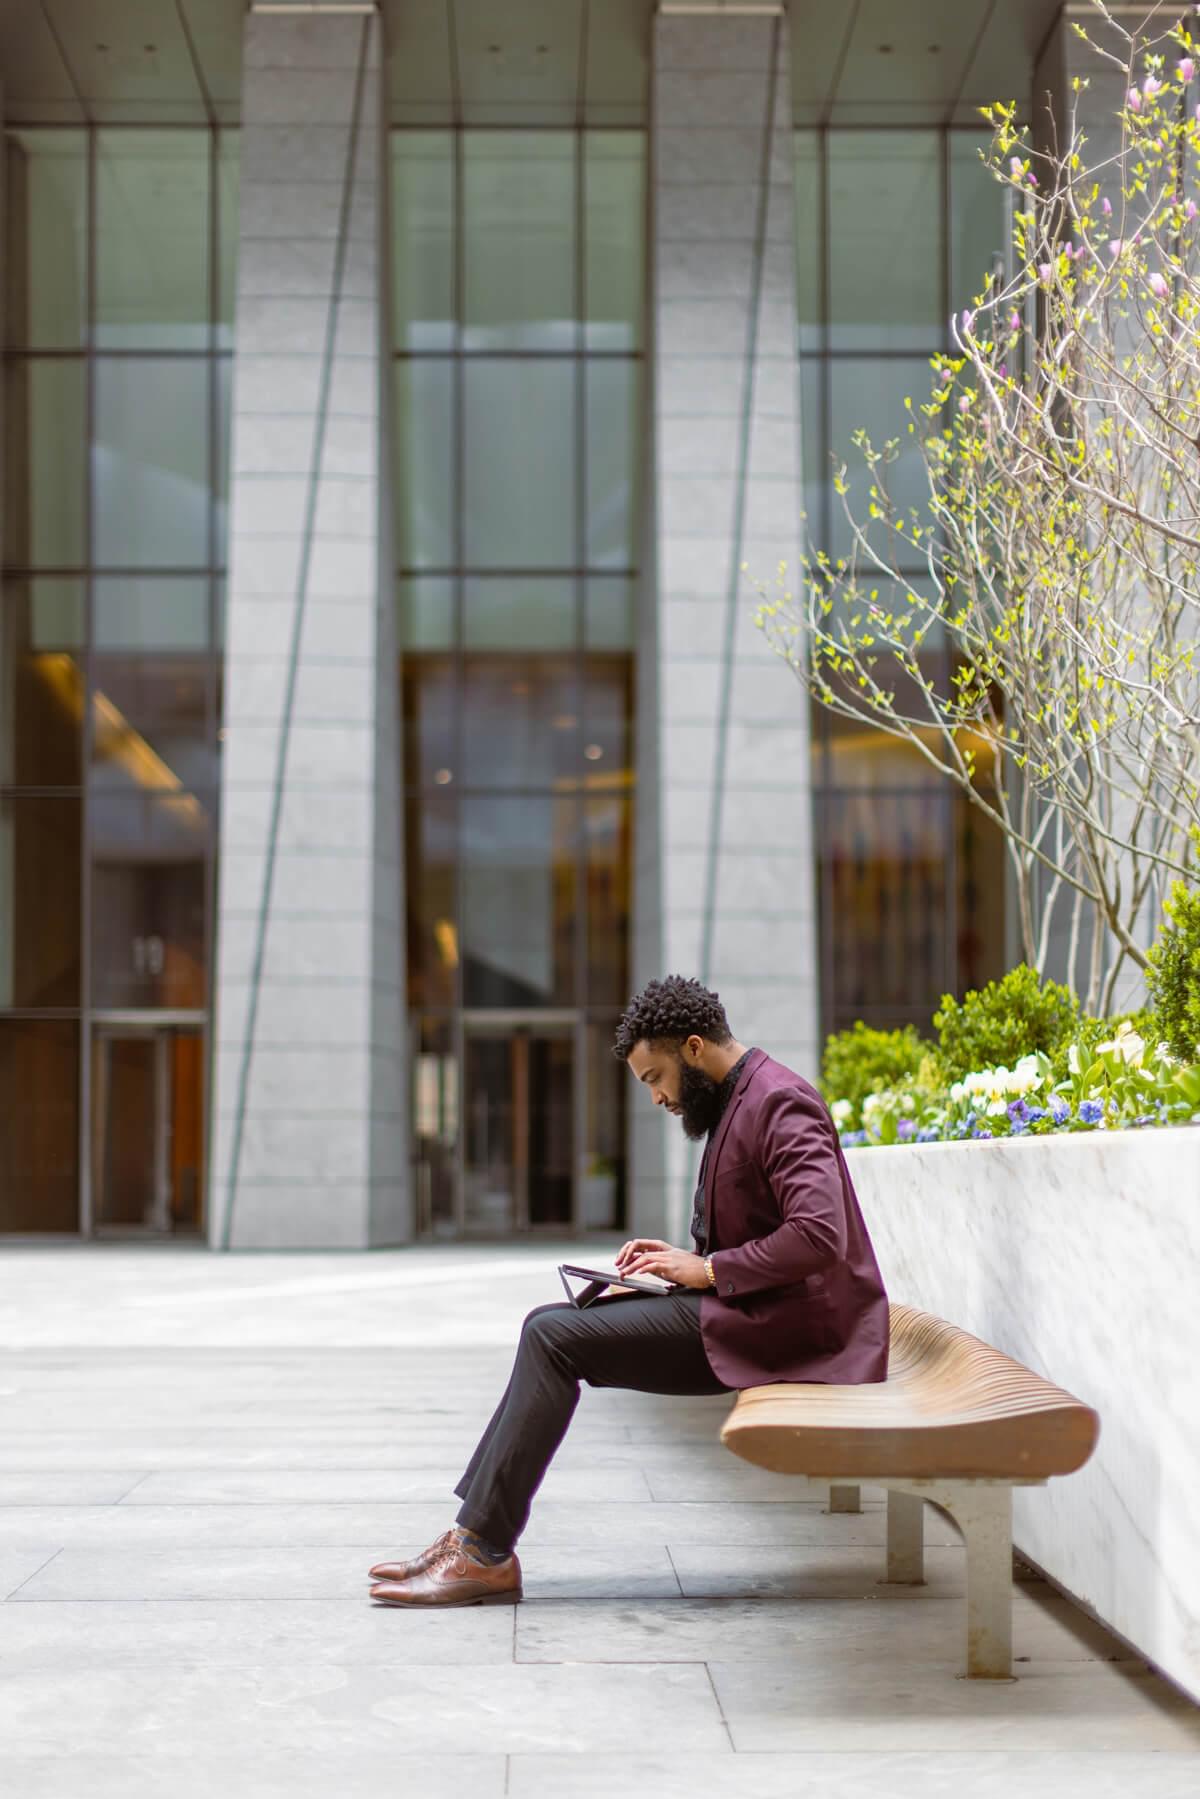 A well-dressed man works on his tablet outside a refined executive building.